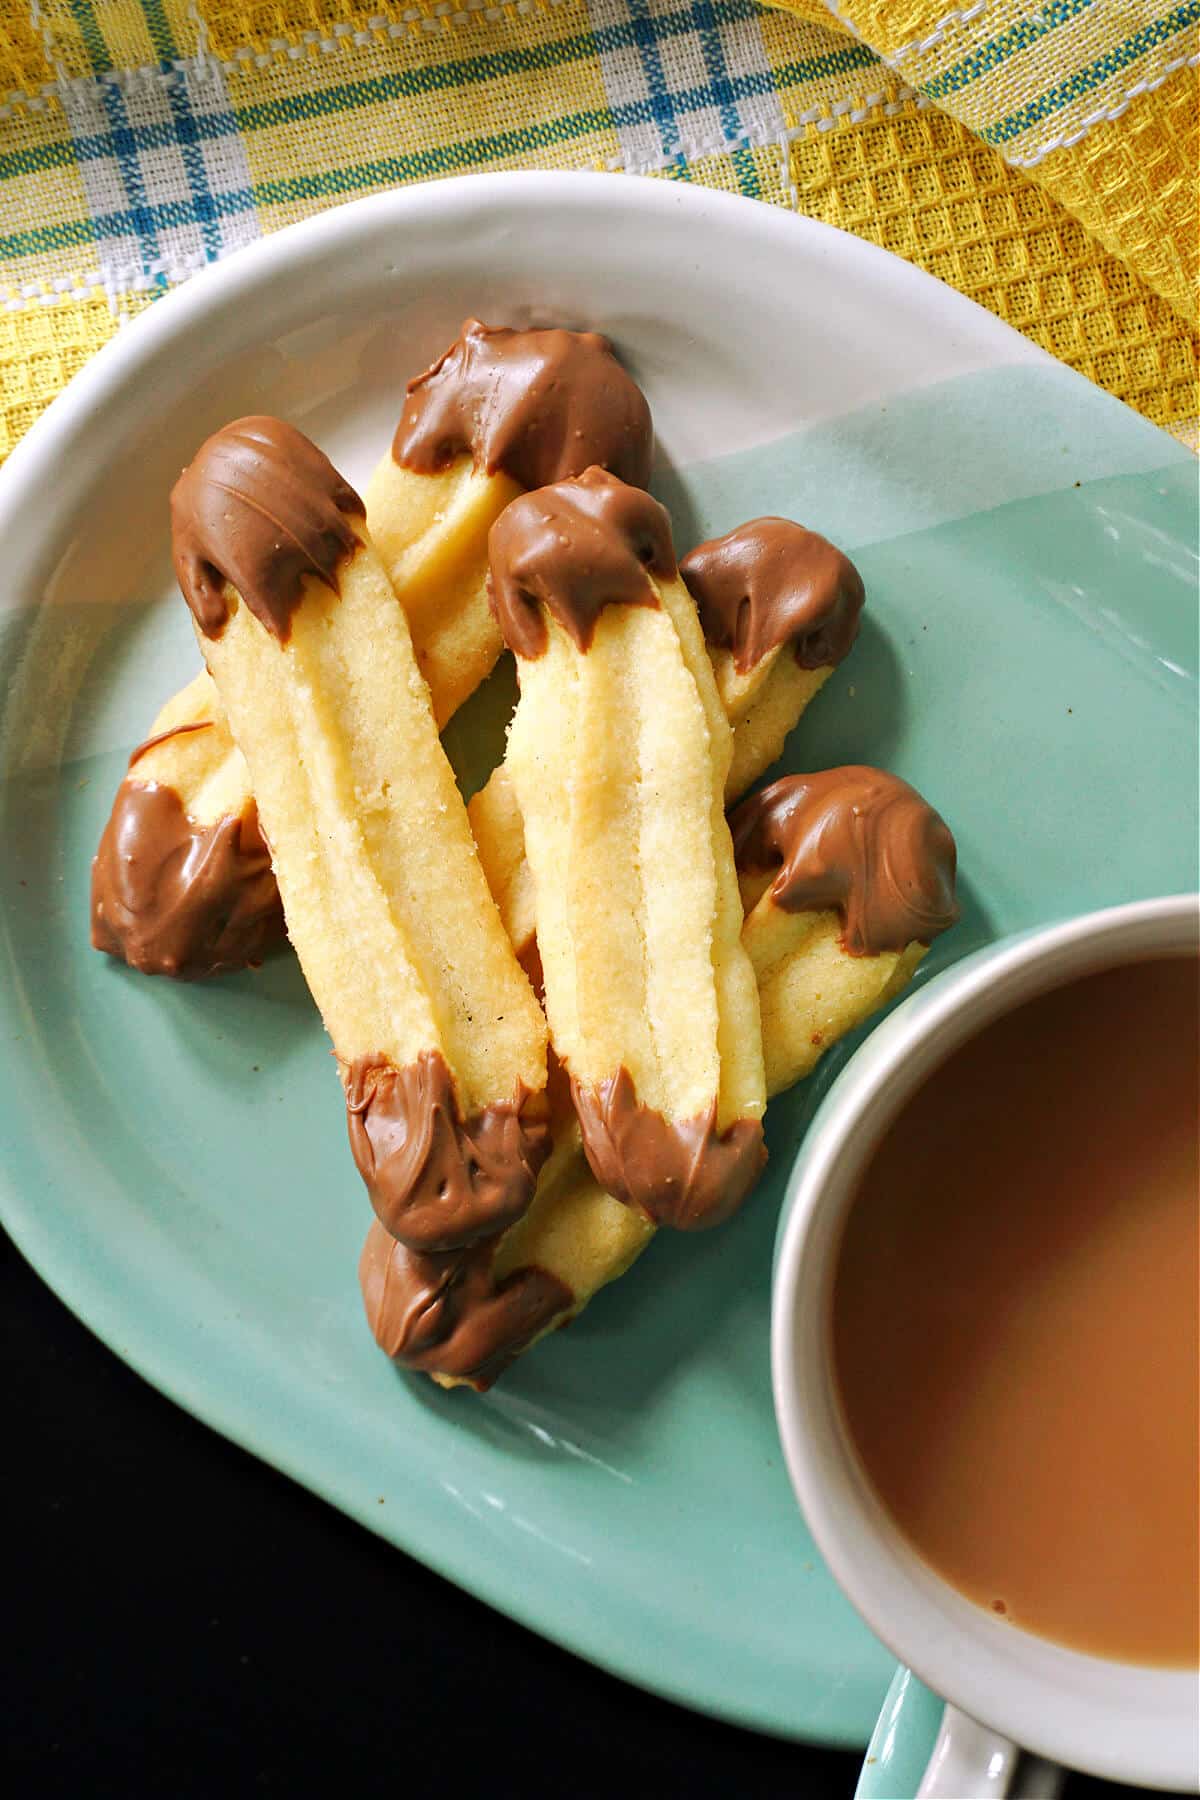 A light blue plate with a cup of tea and 5 Viennese fingers.